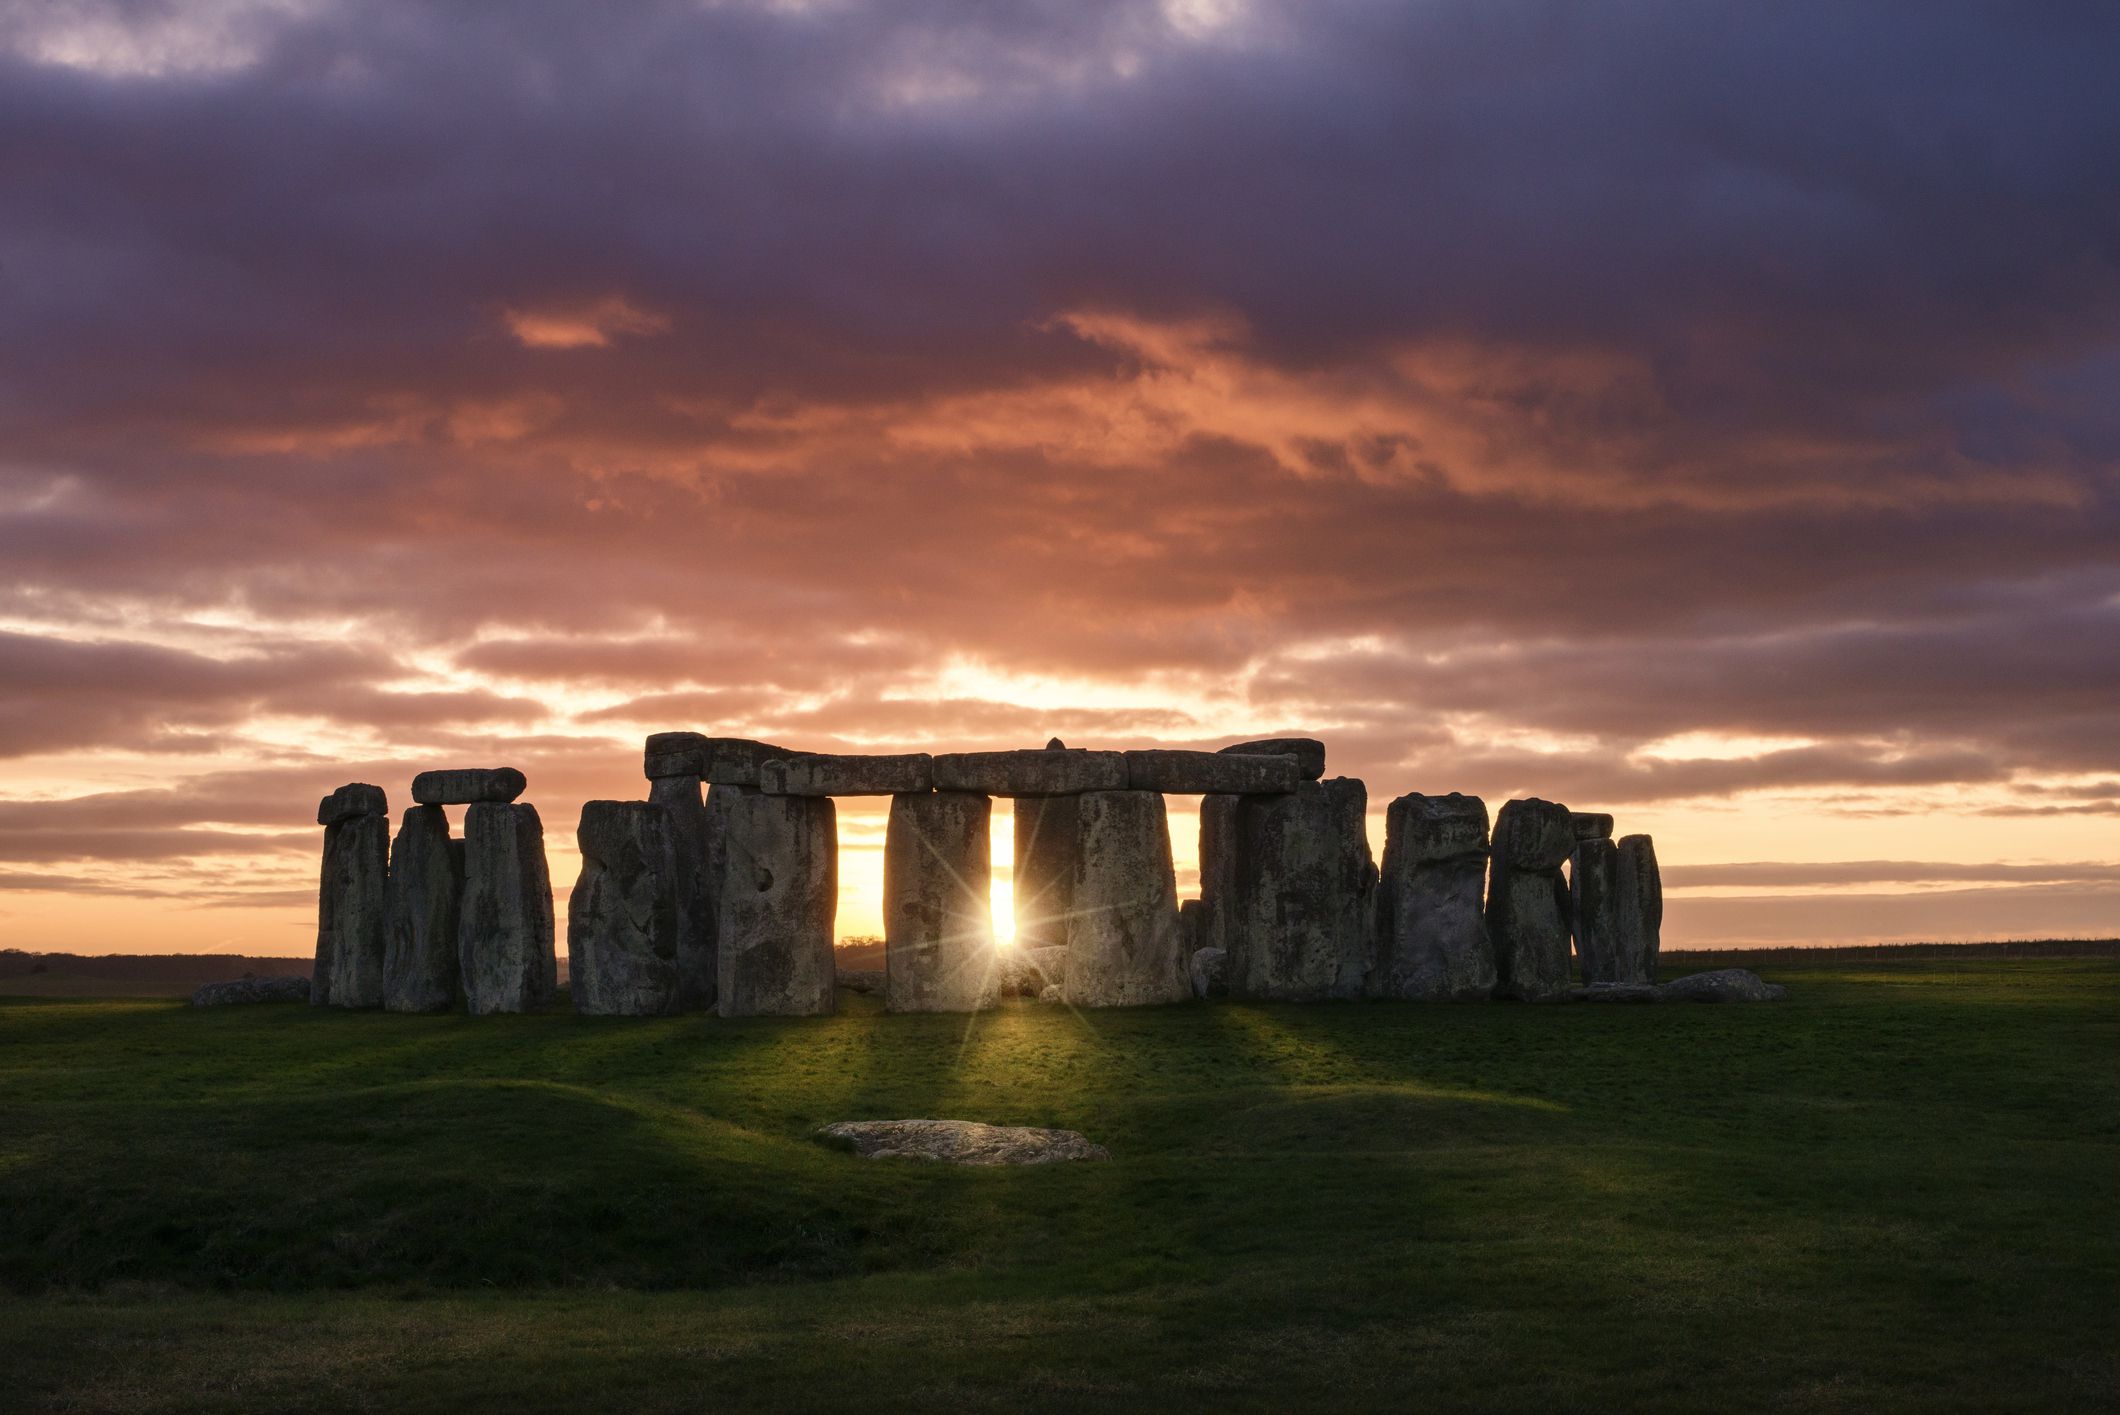 <p><b>Average Star Review</b>: 4.610</p><p>Where else can you witness an ancient monument giving you side-eye while the sun sets? Stonehenge is a mysterious marvel that turns sunsets into a time-travel experience. For a truly special evening, consider booking a <a href="https://www.thetravel.com/how-to-see-the-sunset-at-stonehenge/">sunset tour</a> to enjoy a more intimate view with fewer crowds. These tours — though on the pricier side, ranging from $159.75 to $585 — offer inner circle access, allowing you to get up close to the stones and take stunning photographs. </p>